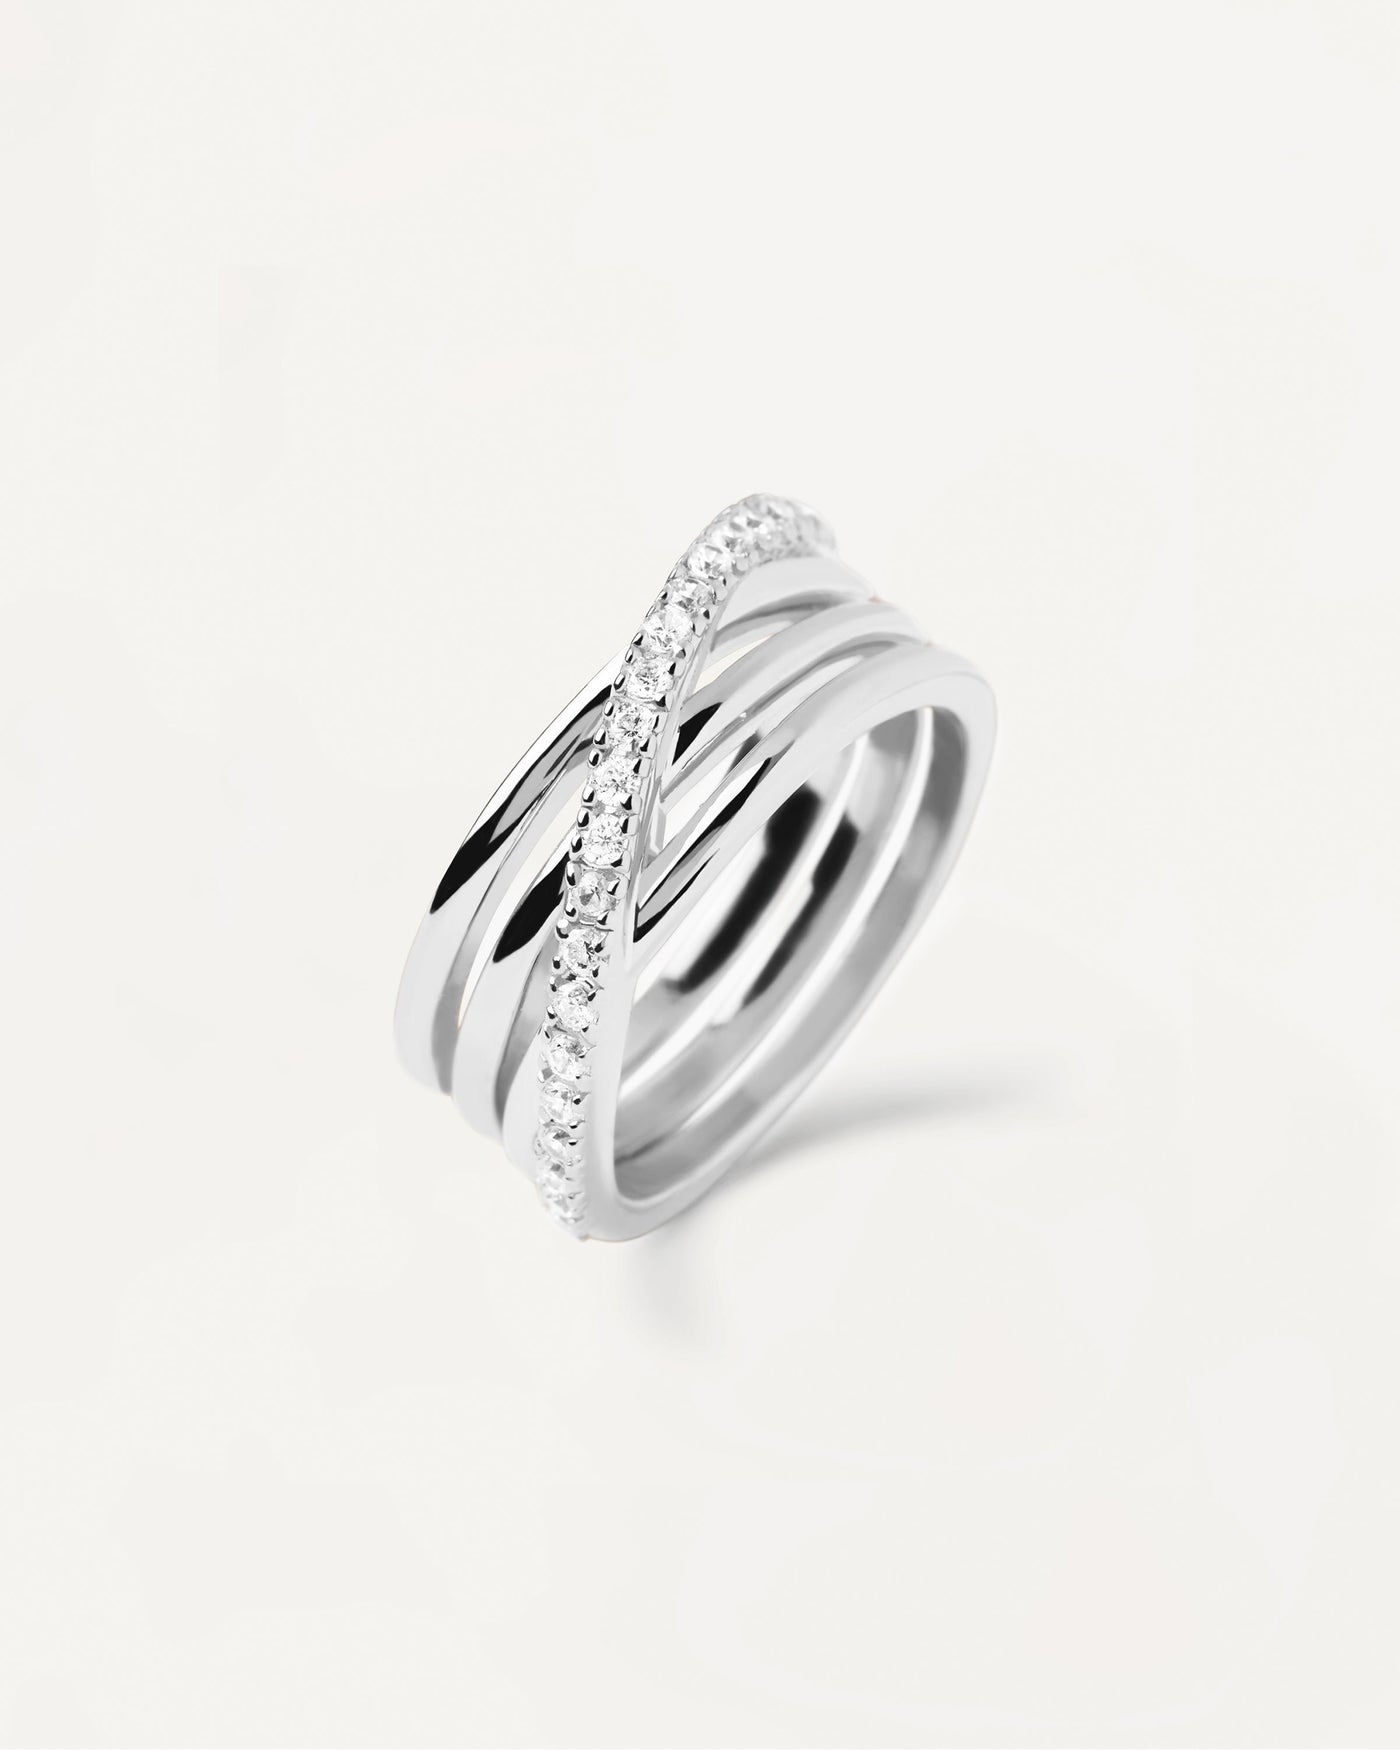 2023 Selection | Cruise Silver Ring. Sterling silver ring with 4 bars and white zirconia. Get the latest arrival from PDPAOLA. Place your order safely and get this Best Seller. Free Shipping.